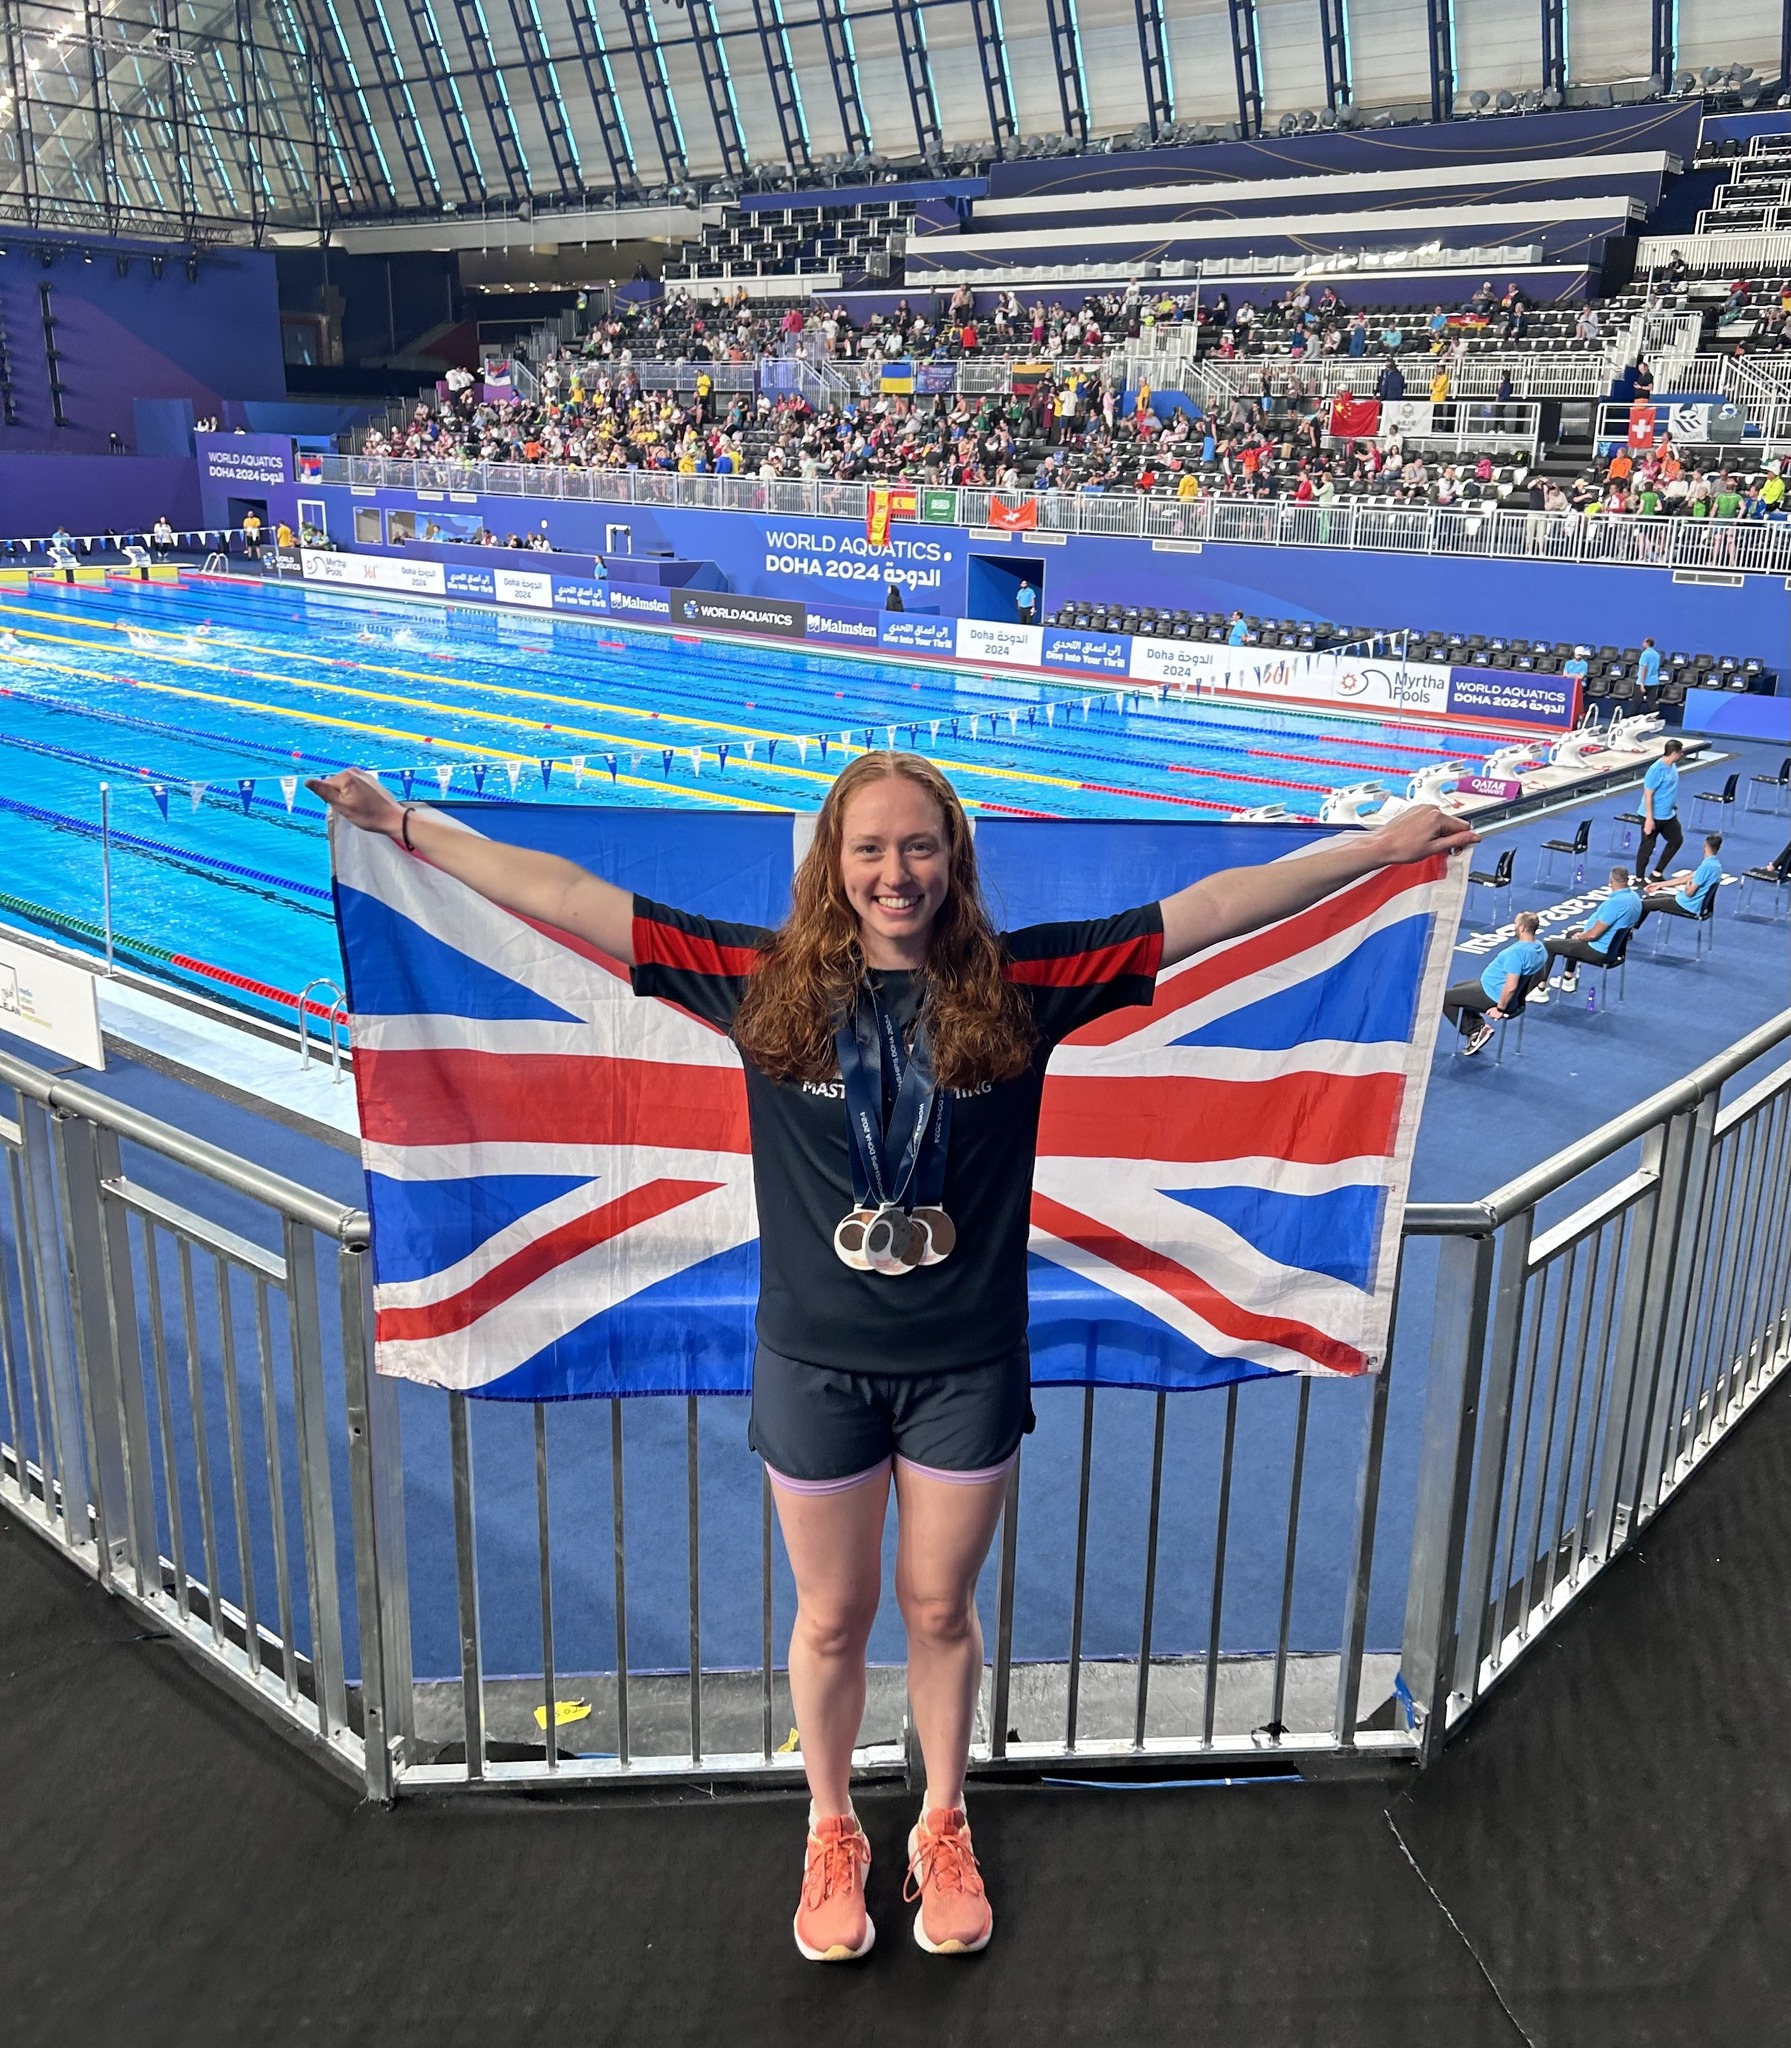 Salford doctor picked up four medals at the World Aquatics in Qatar